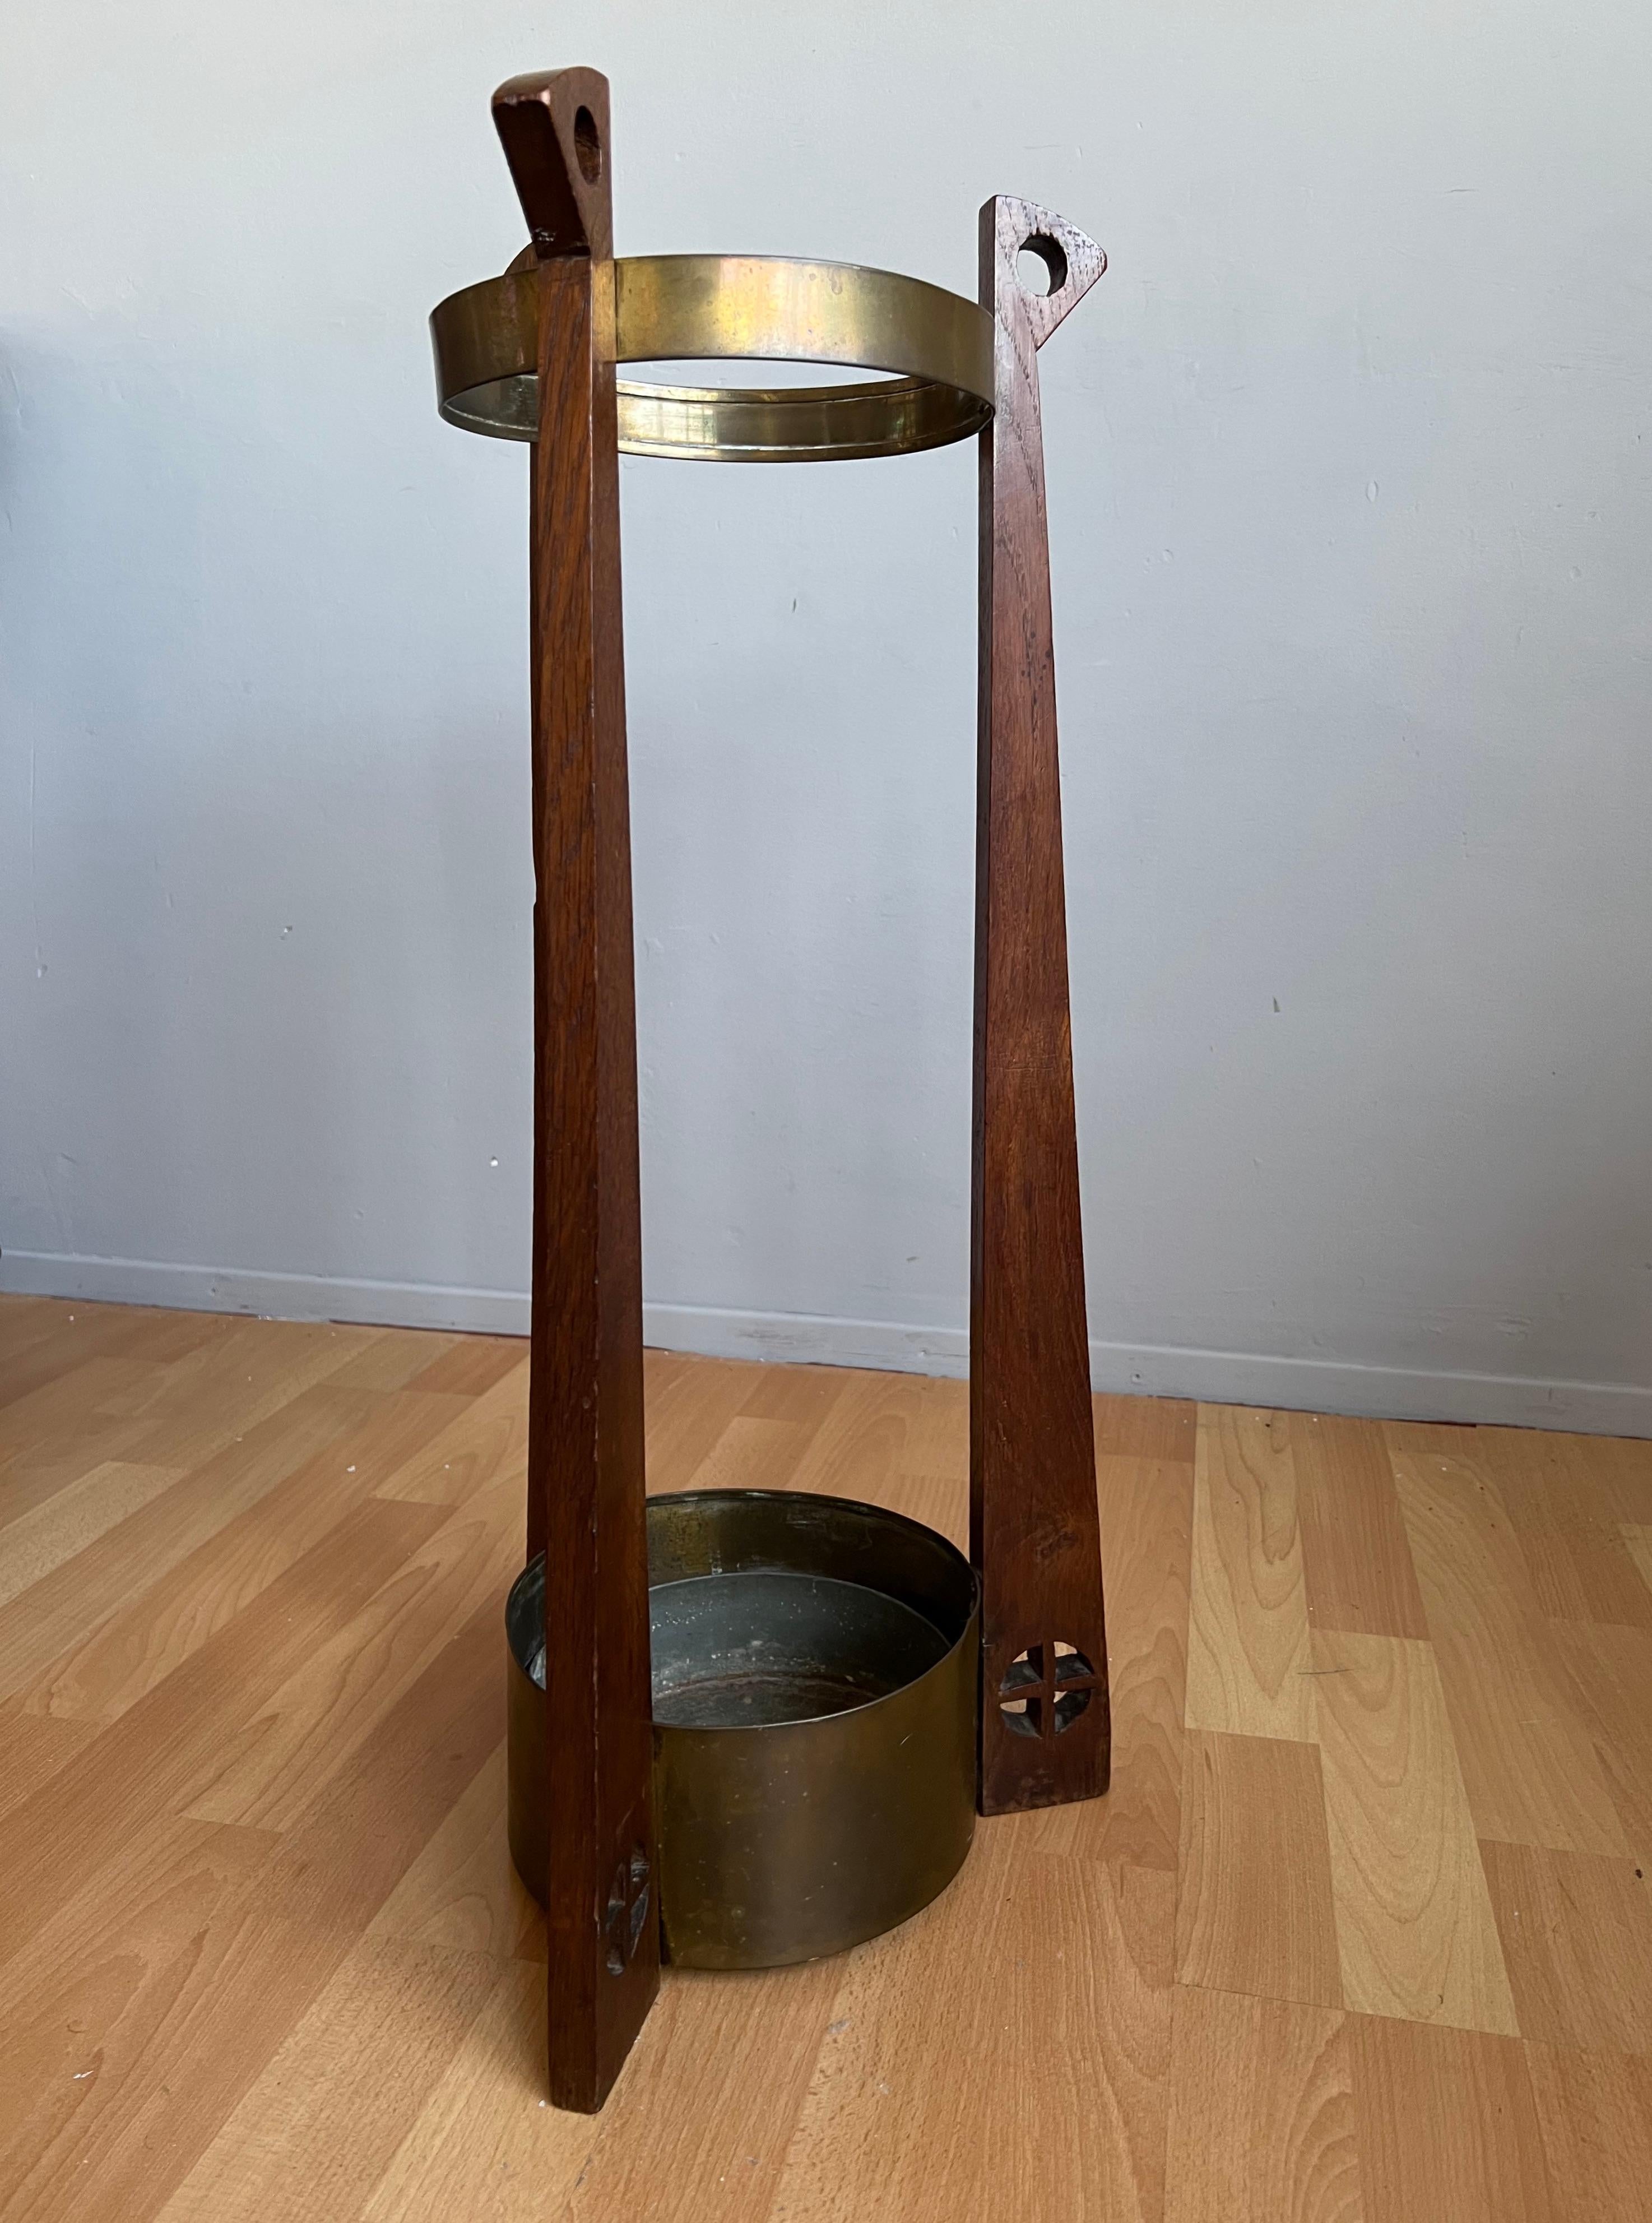 Gustave Serrurier-Bovy Brass and Oak Cane & Umbrella Stand with Zinc Liner For Sale 1